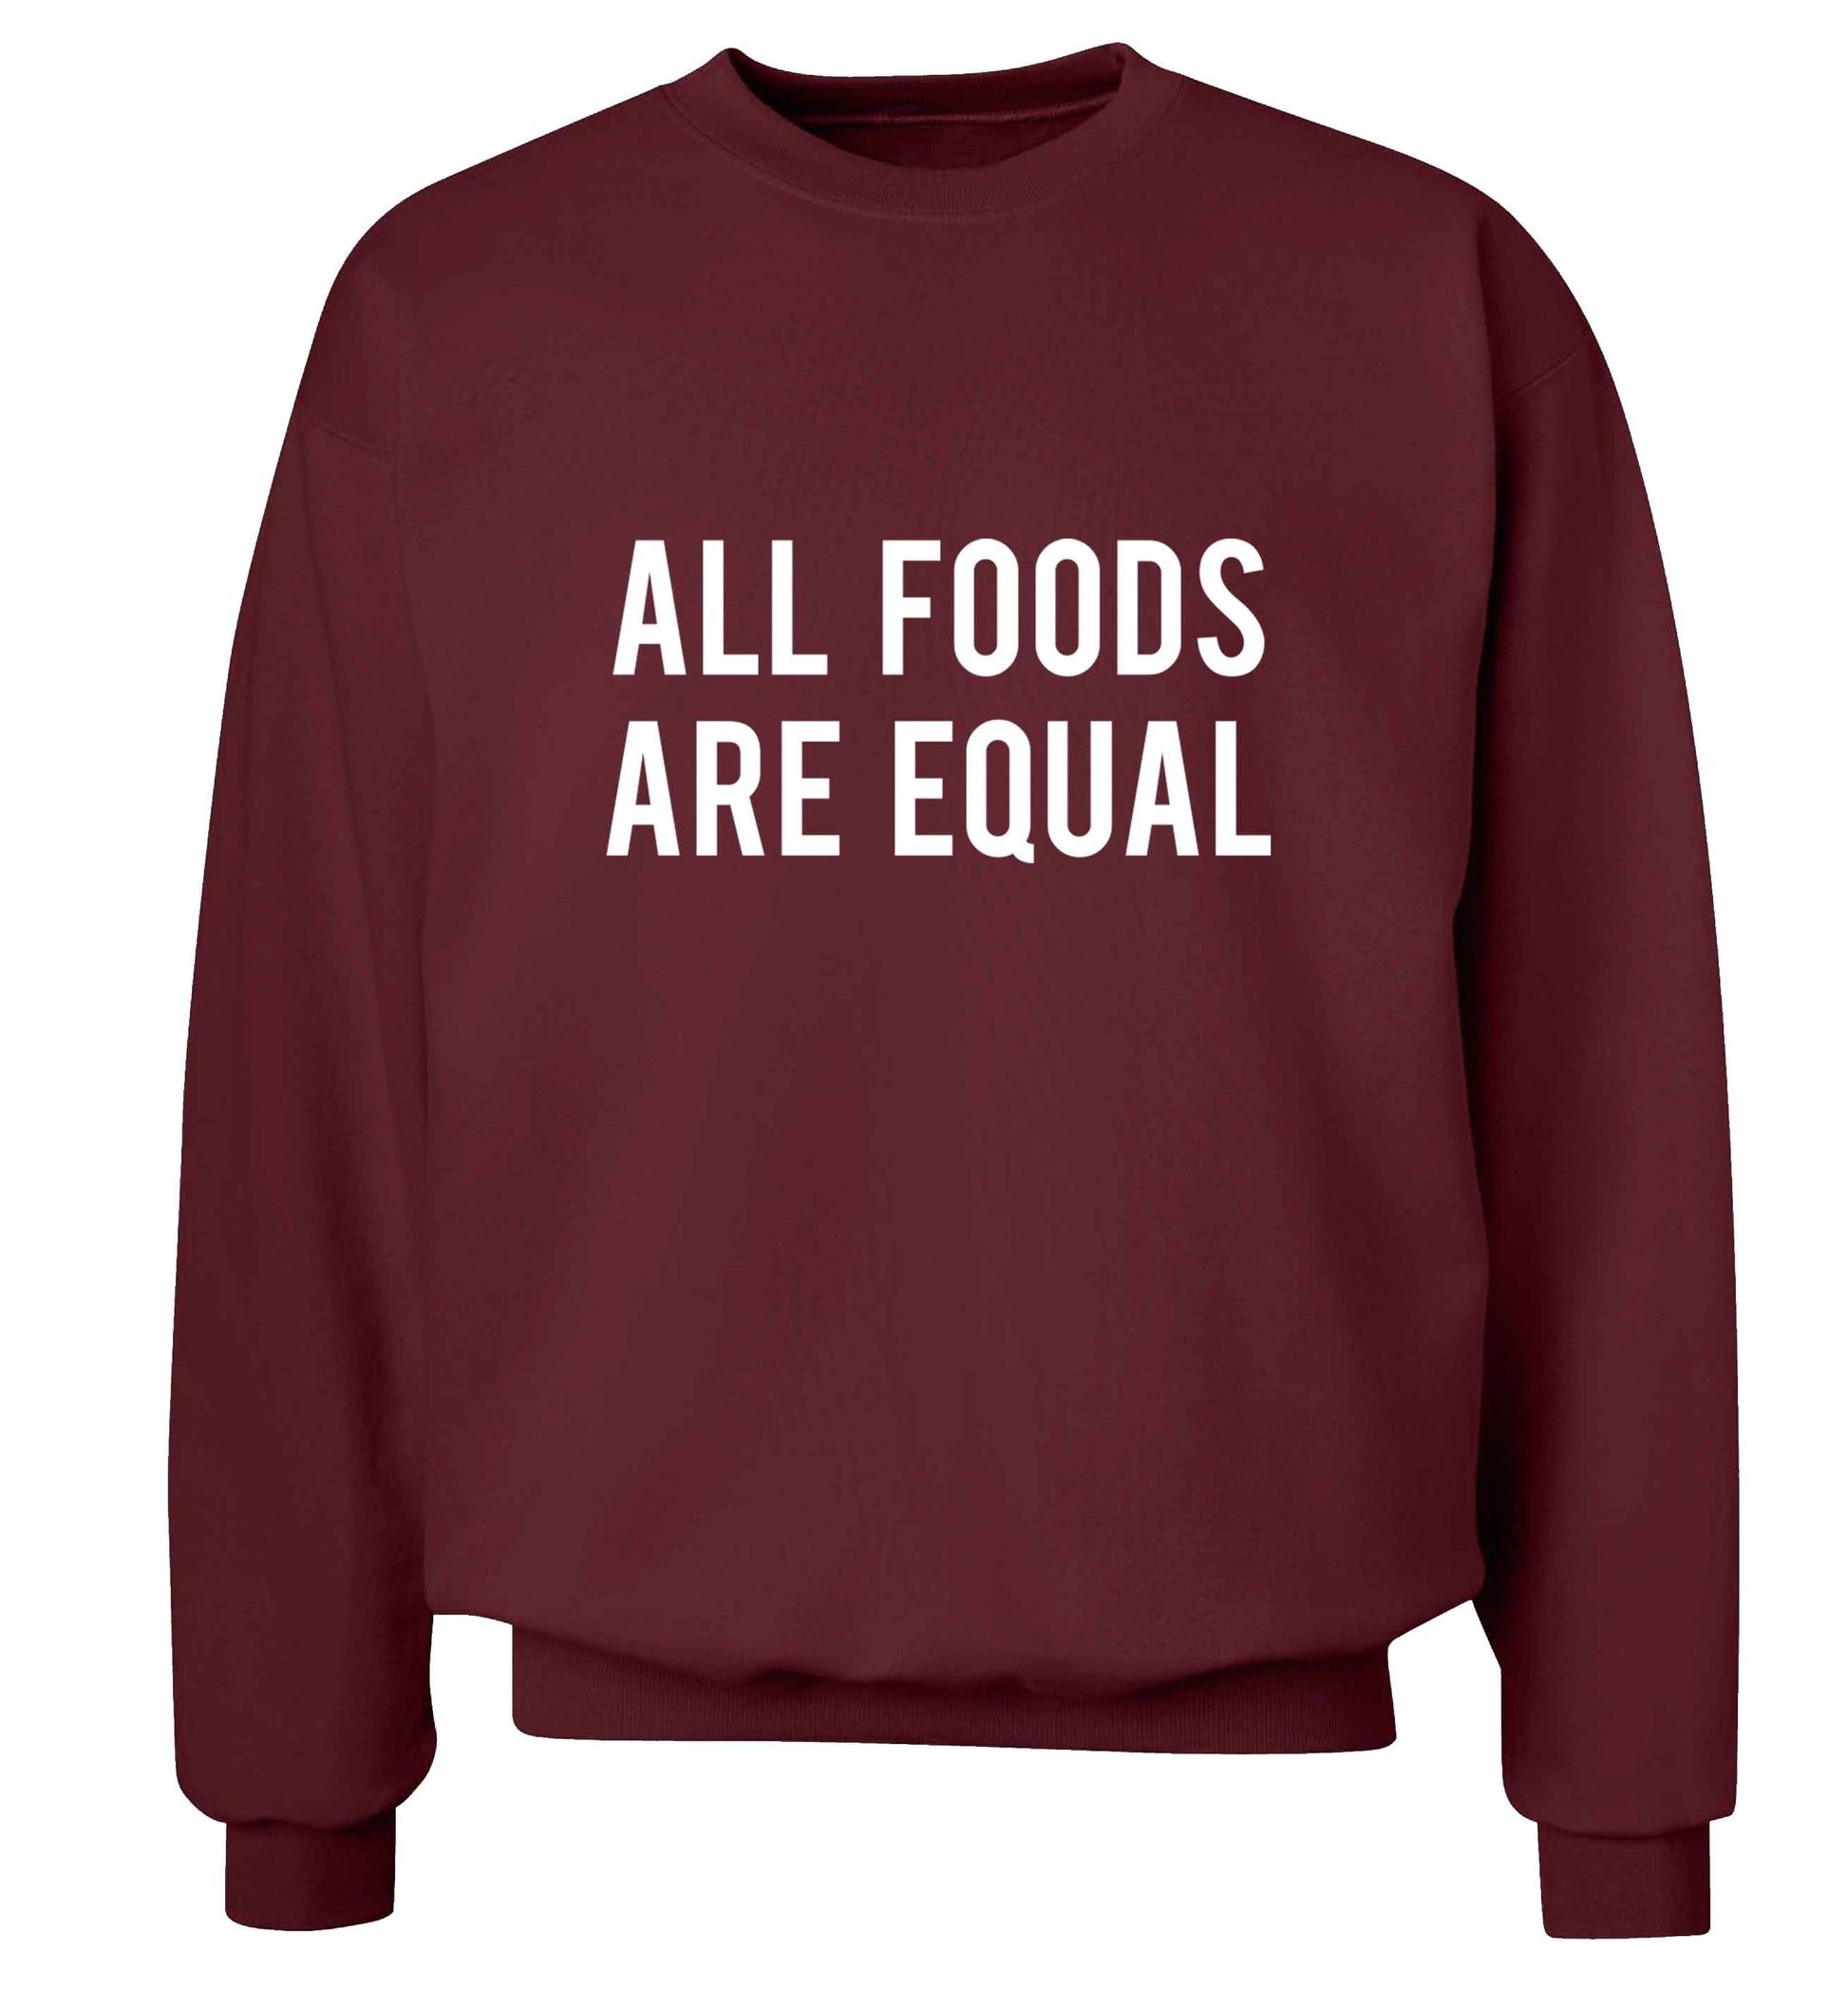 All foods are equal adult's unisex maroon sweater 2XL